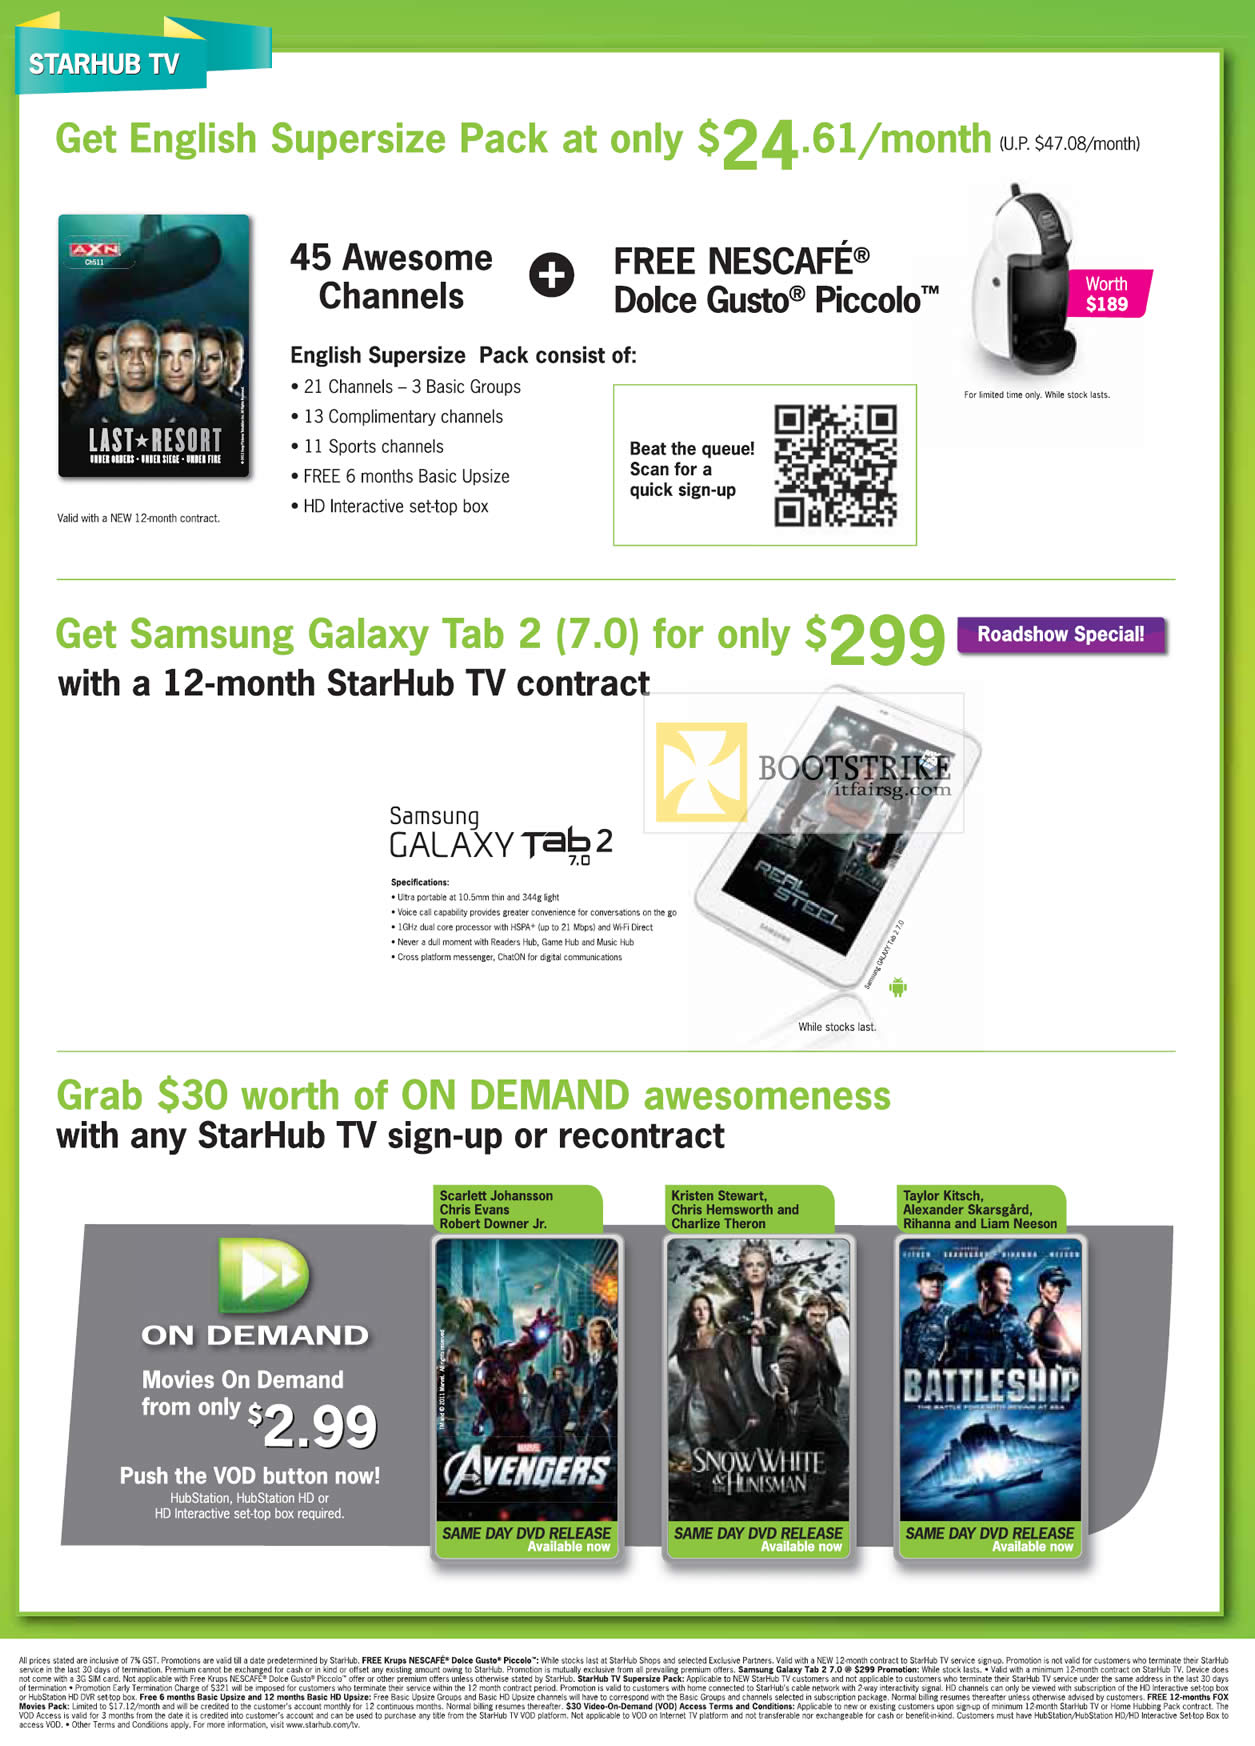 COMEX 2012 price list image brochure of Starhub TV English Supersize Pack, Free Nescafe Dolce Gusto Piccolo, Samsung Galaxy Tab 2 7.0, On Demand